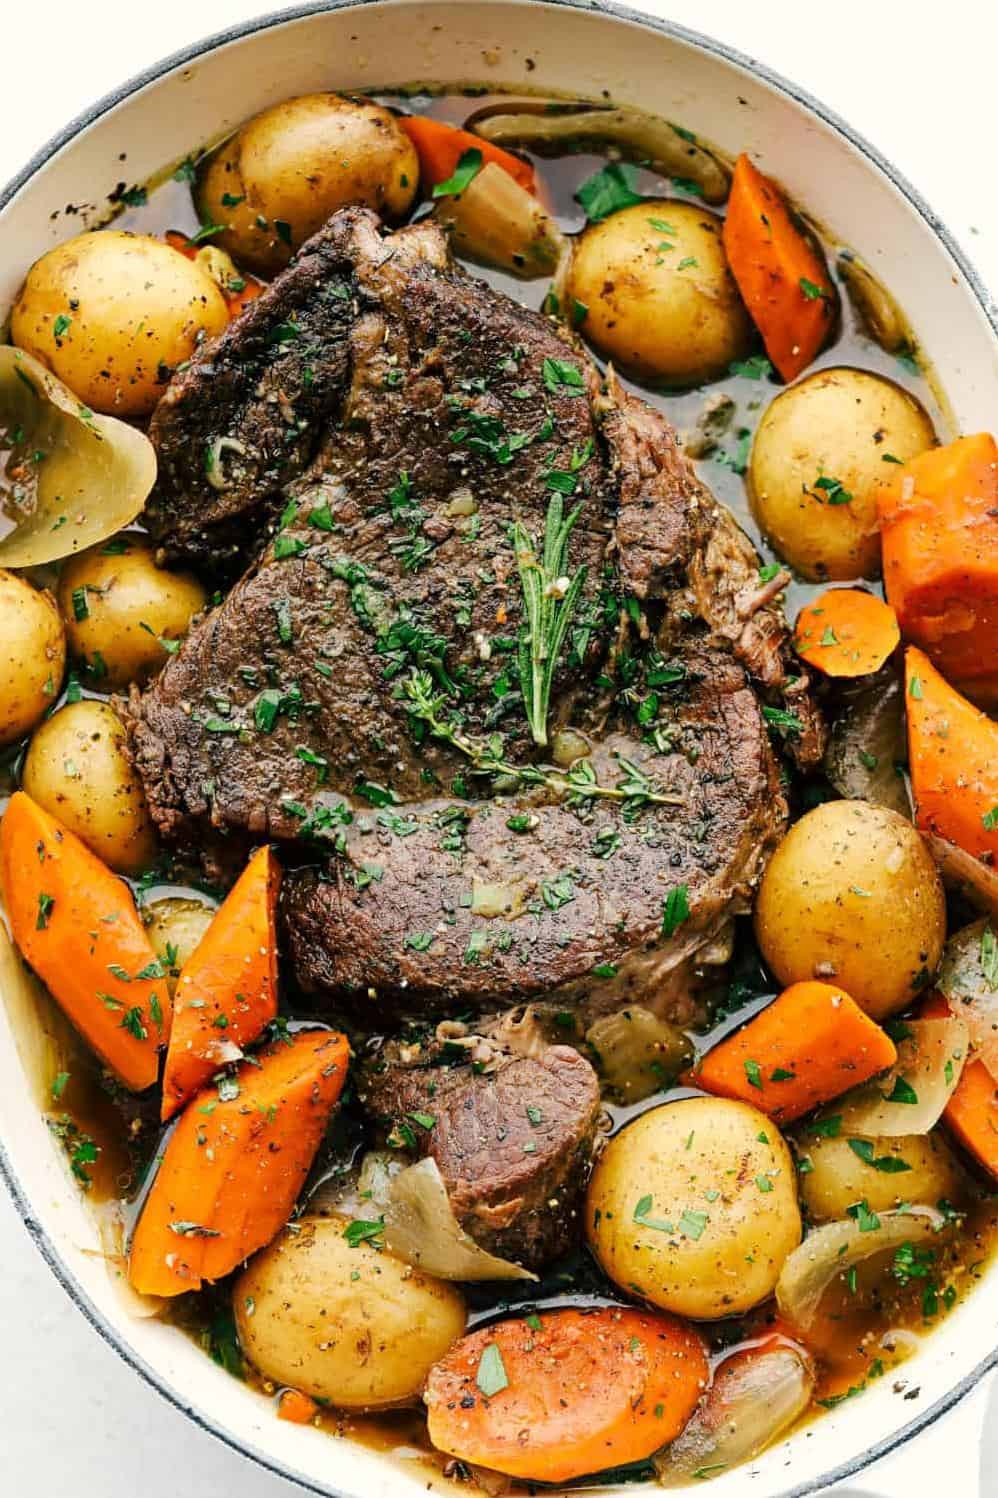  The ultimate crowd-pleaser - this pot roast is easy to make and even easier to love.